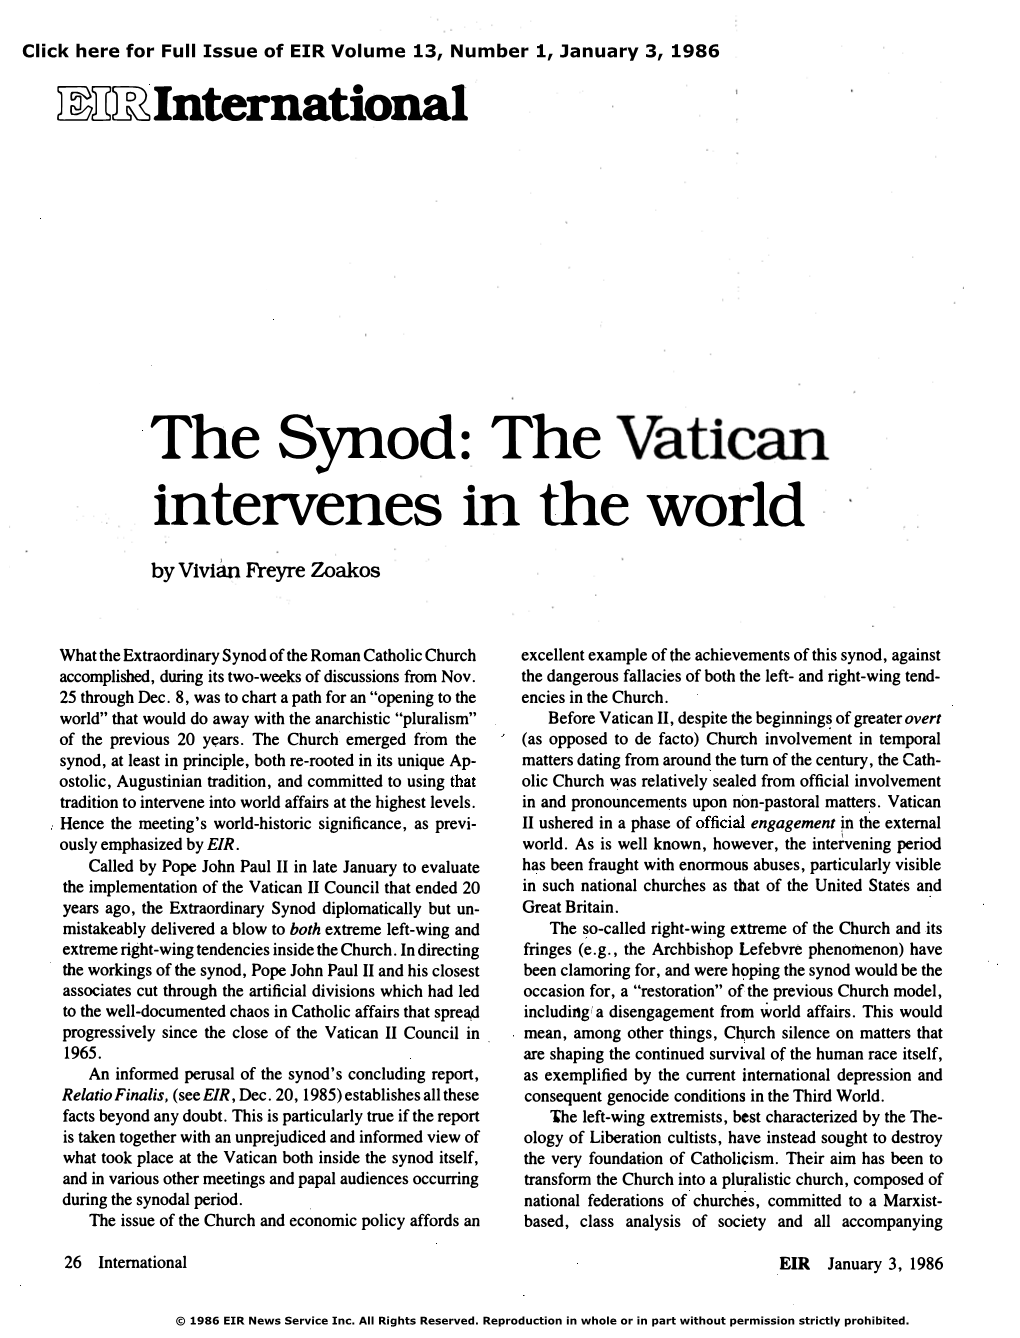 The Synod: the Vatican Intervenes in the World